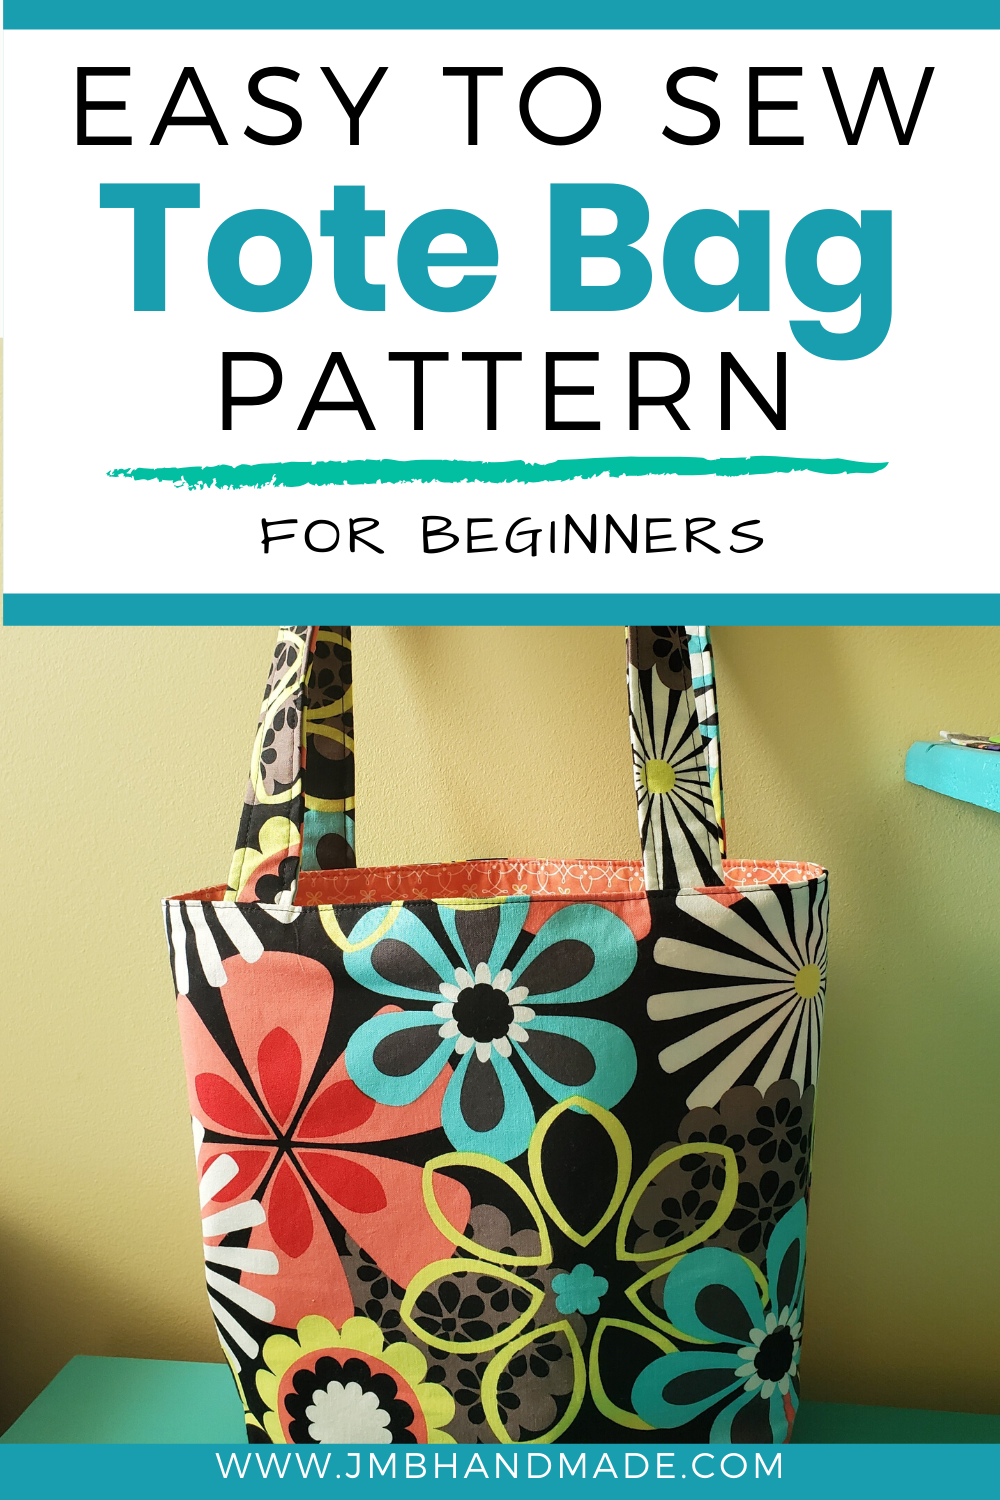 Easy to Sew Tote Bag Pattern - Easy to Sew Tote Bag Pattern -   16 diy Beauty bag ideas